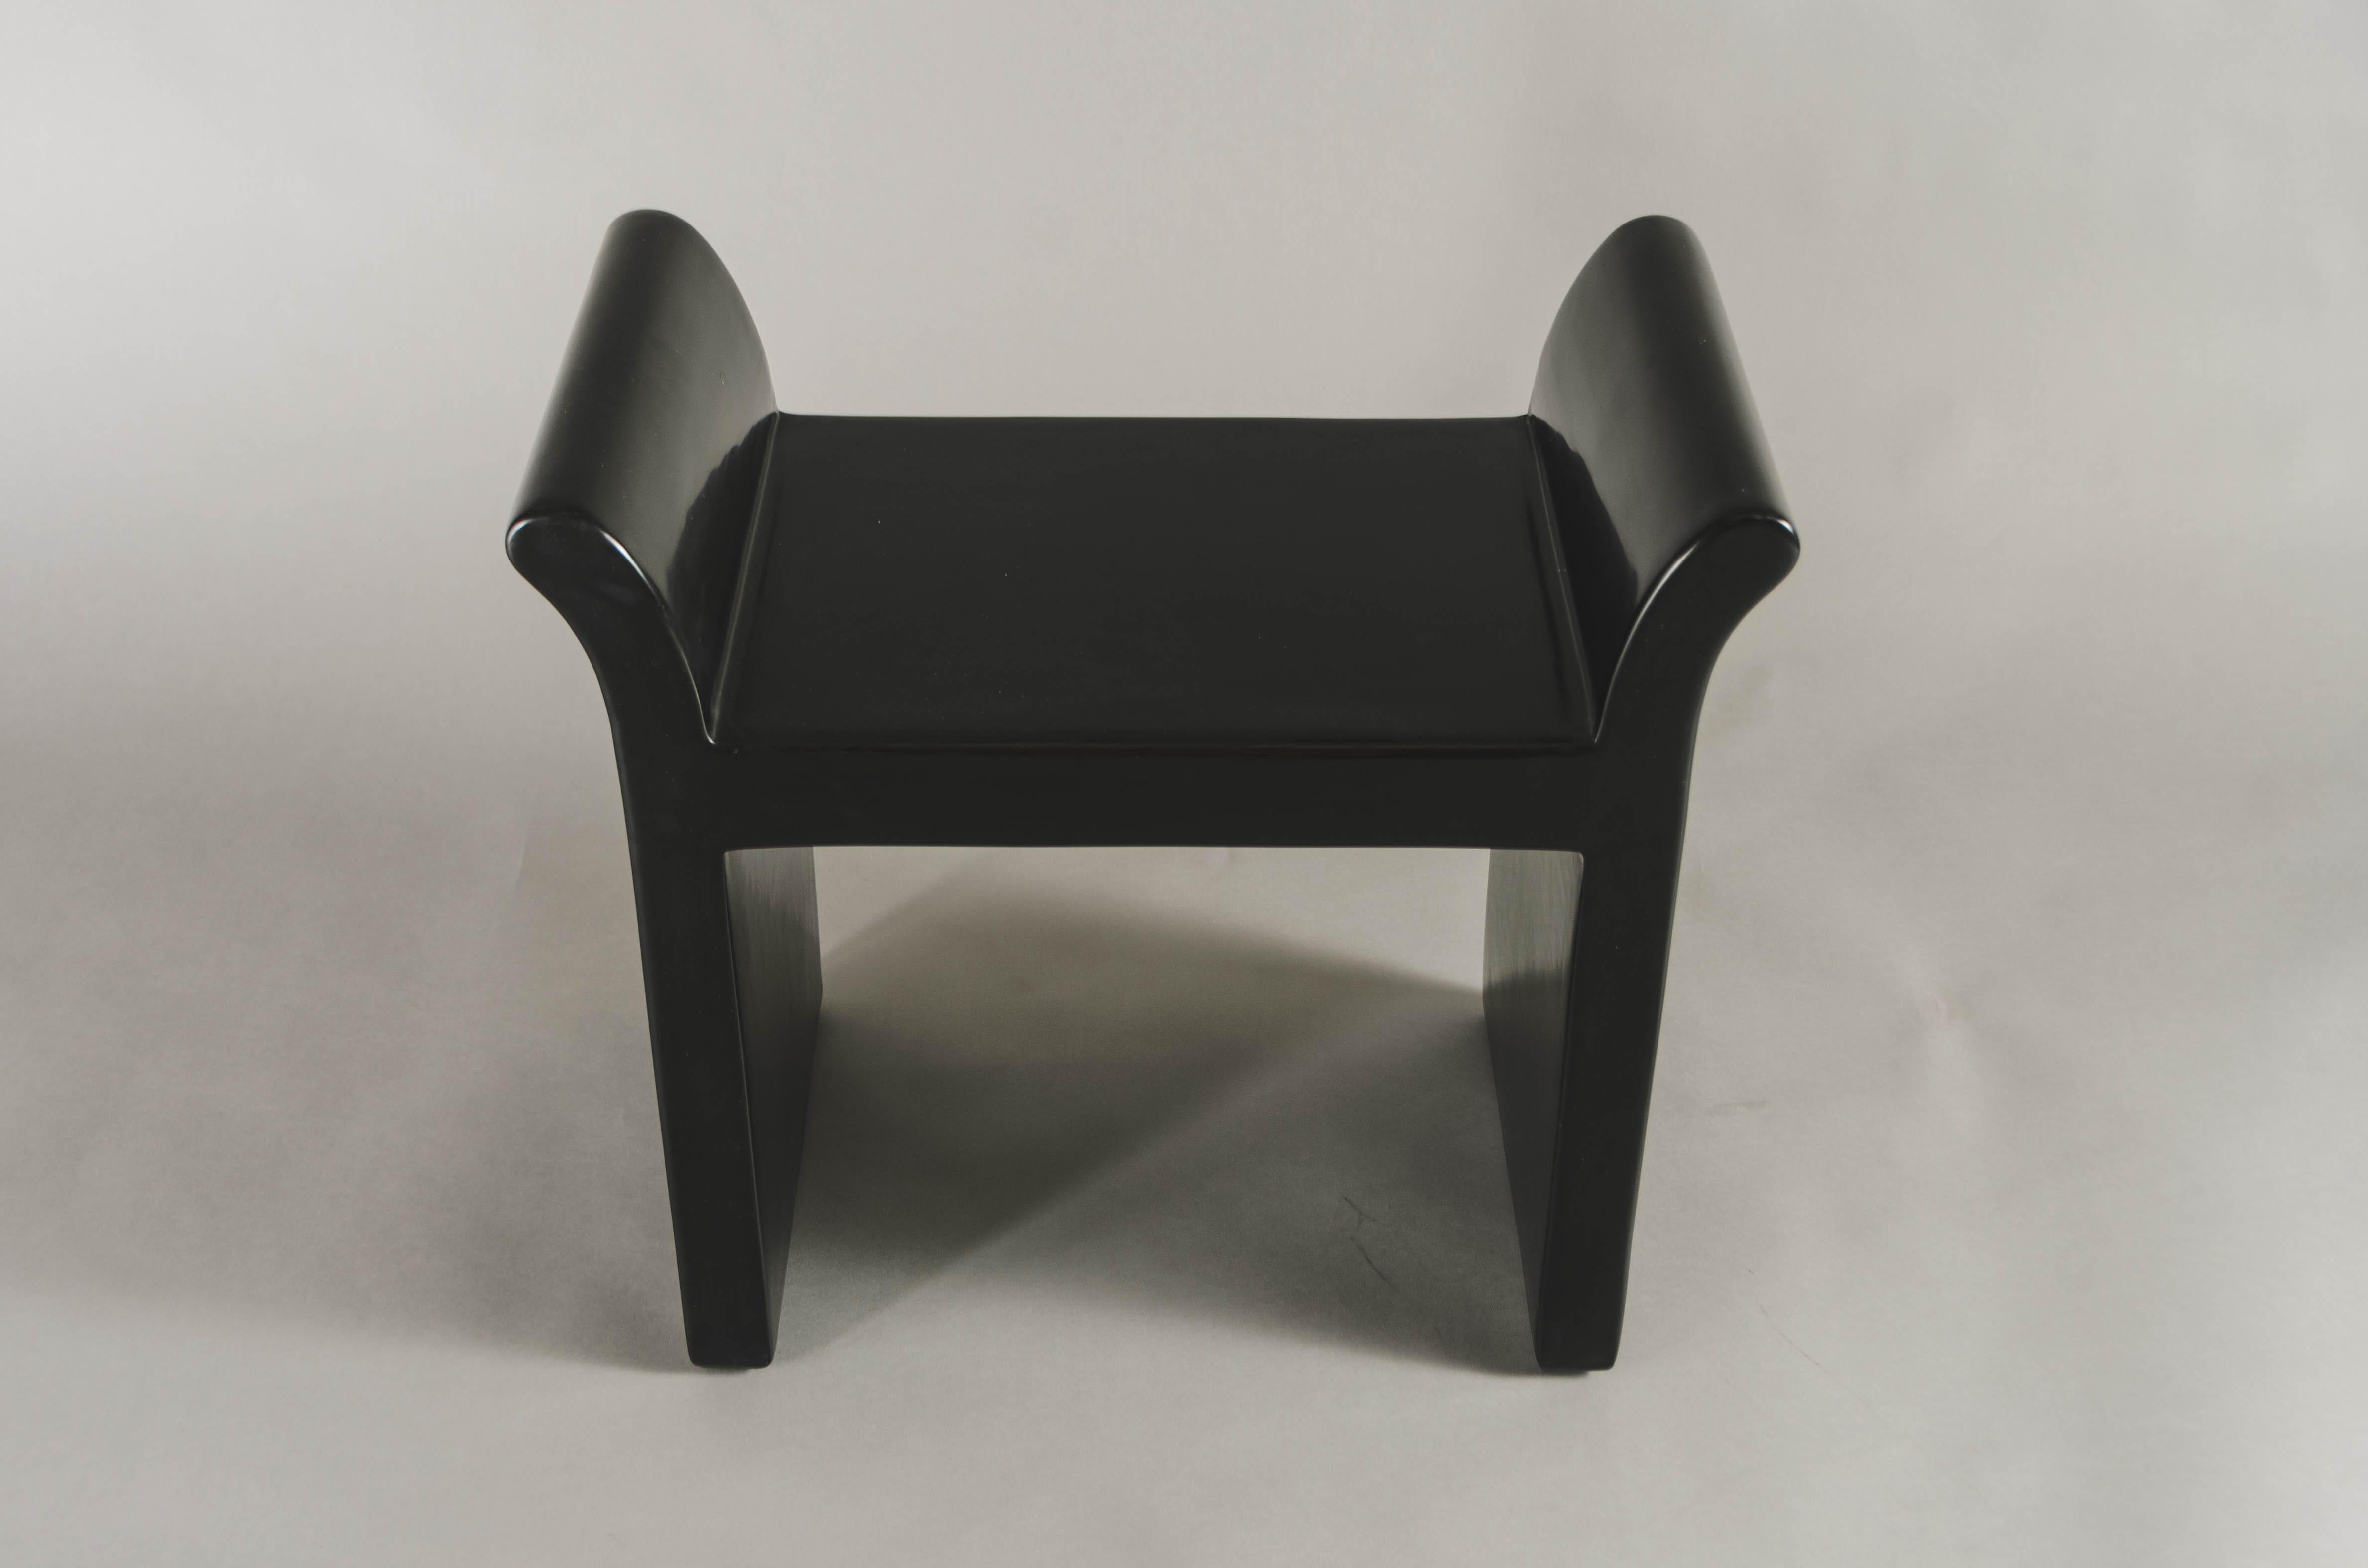 Modern Contemporary Black Lacquer Vanity Seat by Robert Kuo, Hand Made, Limited Edition For Sale